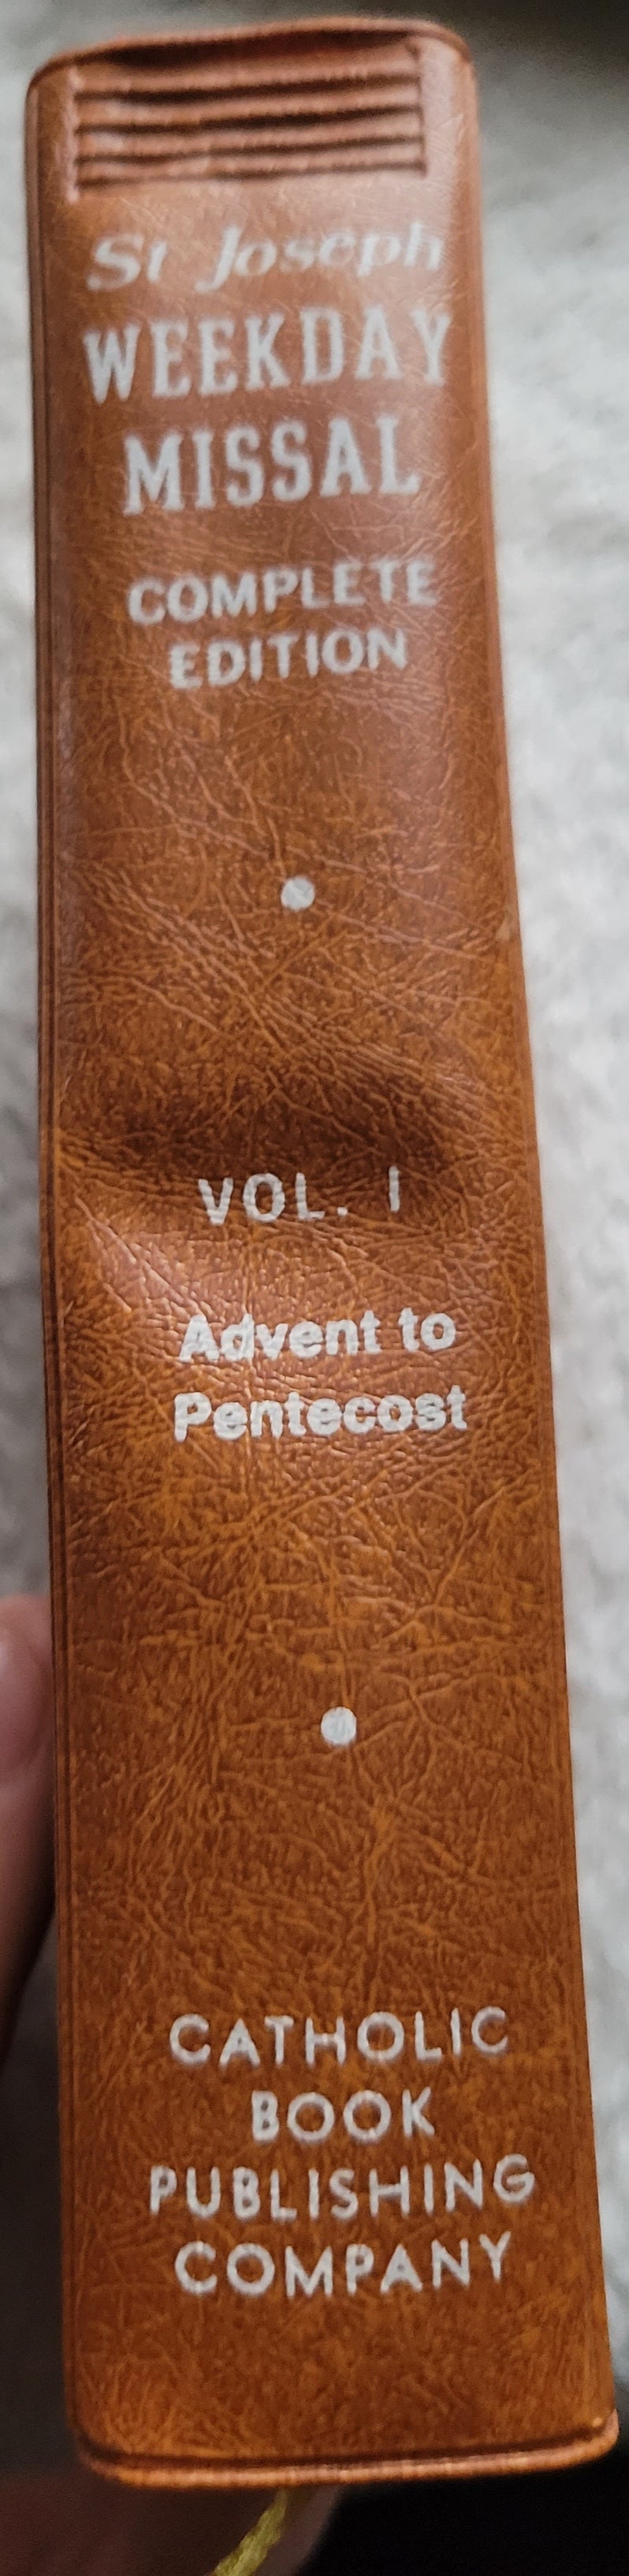 Vintage book for sale, "New....St. Joseph Weekday Missal Vol 1: Advent to Pentecost" Complete Edition, by the Catholic Book Publishing Company, "In accordance with Vatican II". View of spine